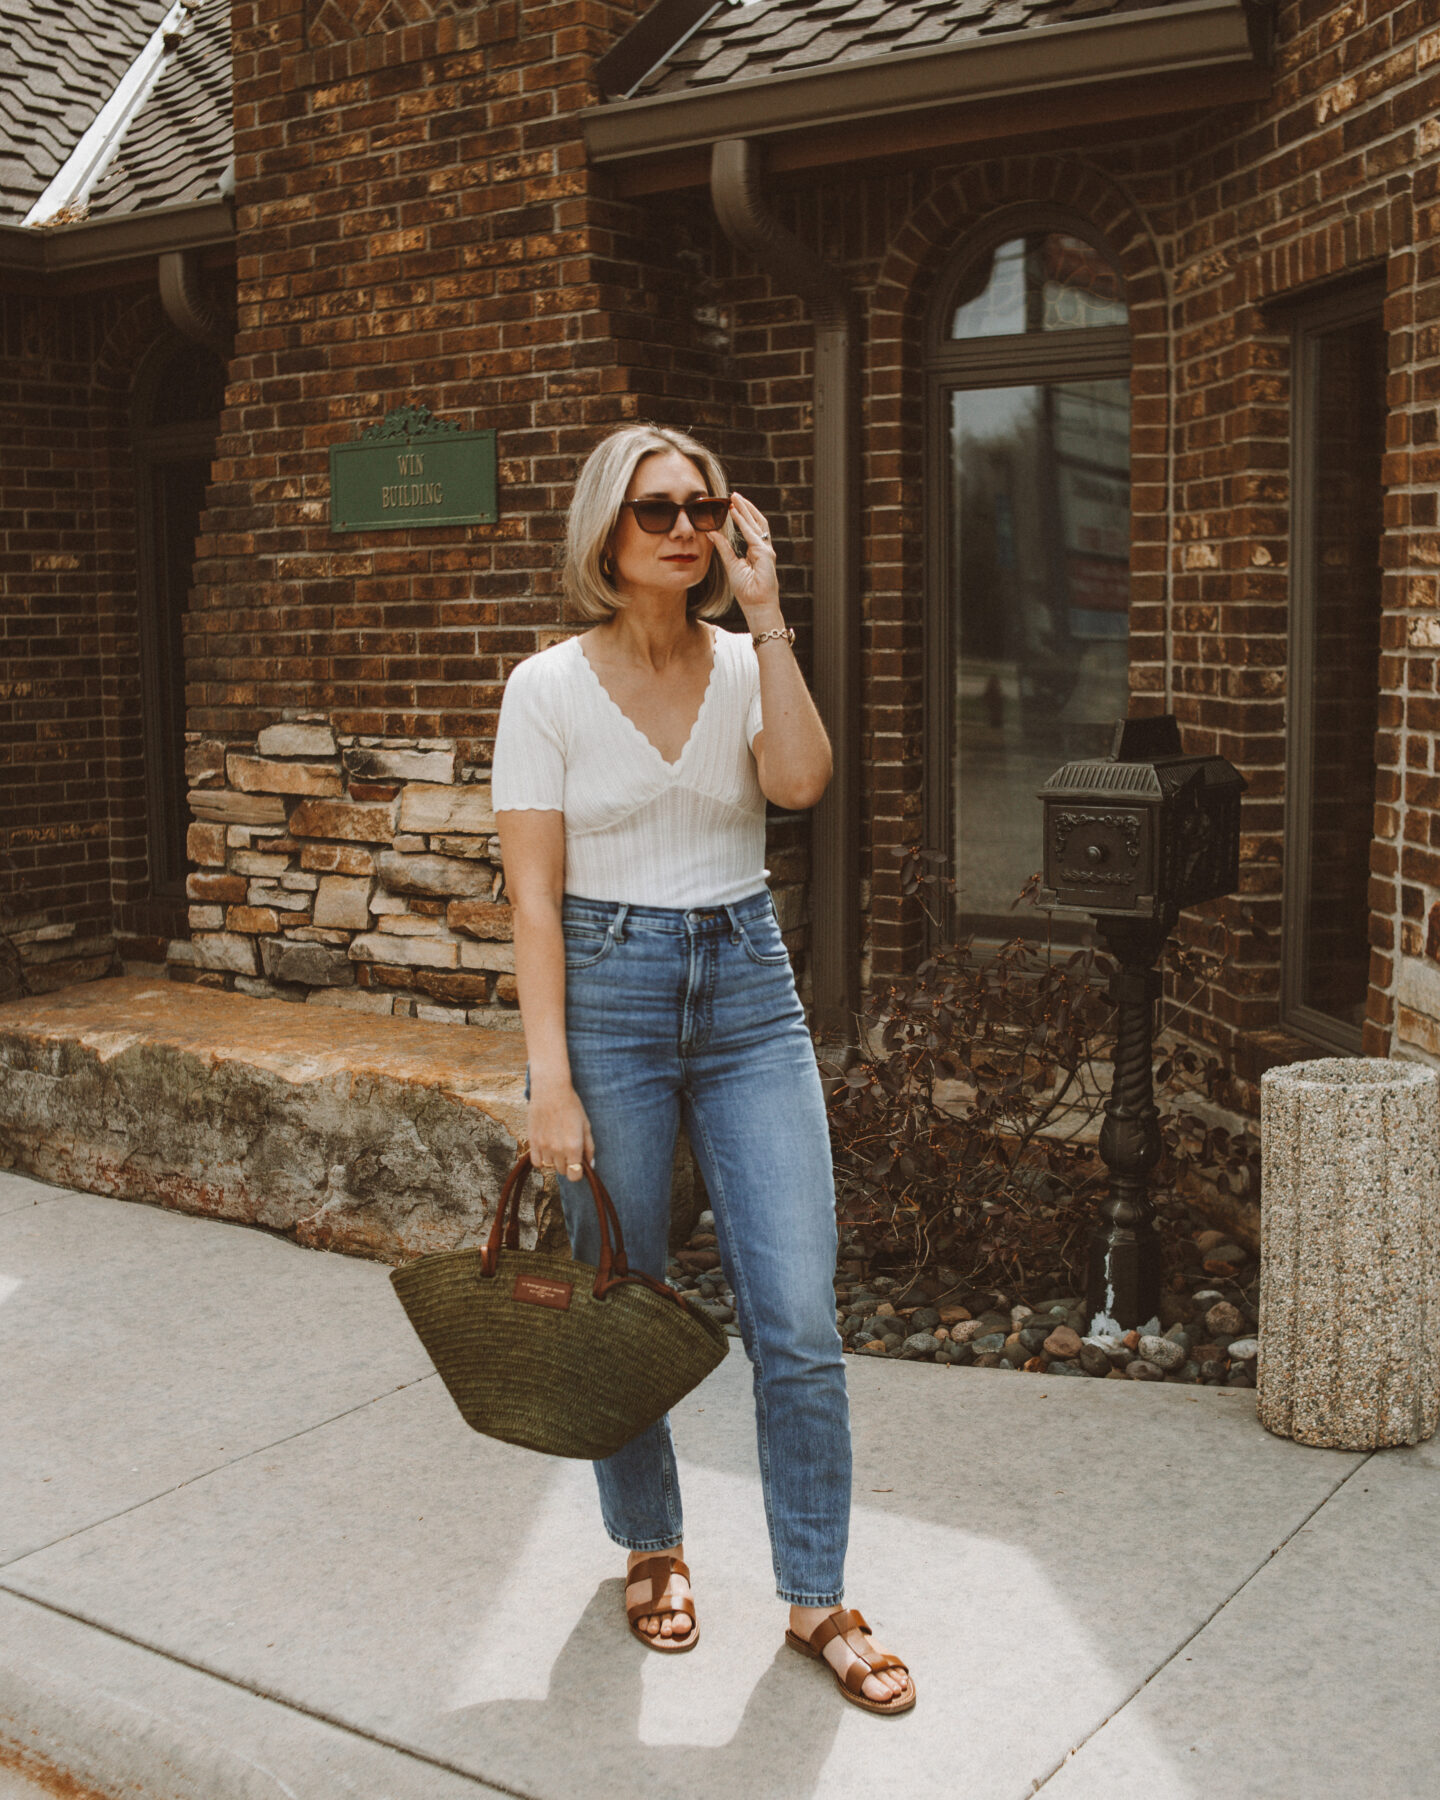 Karin Emily stands in front of a brick building wearing a white v neck tee from Sezane, a pair of blue jeans, and a khaki green justine basket bag